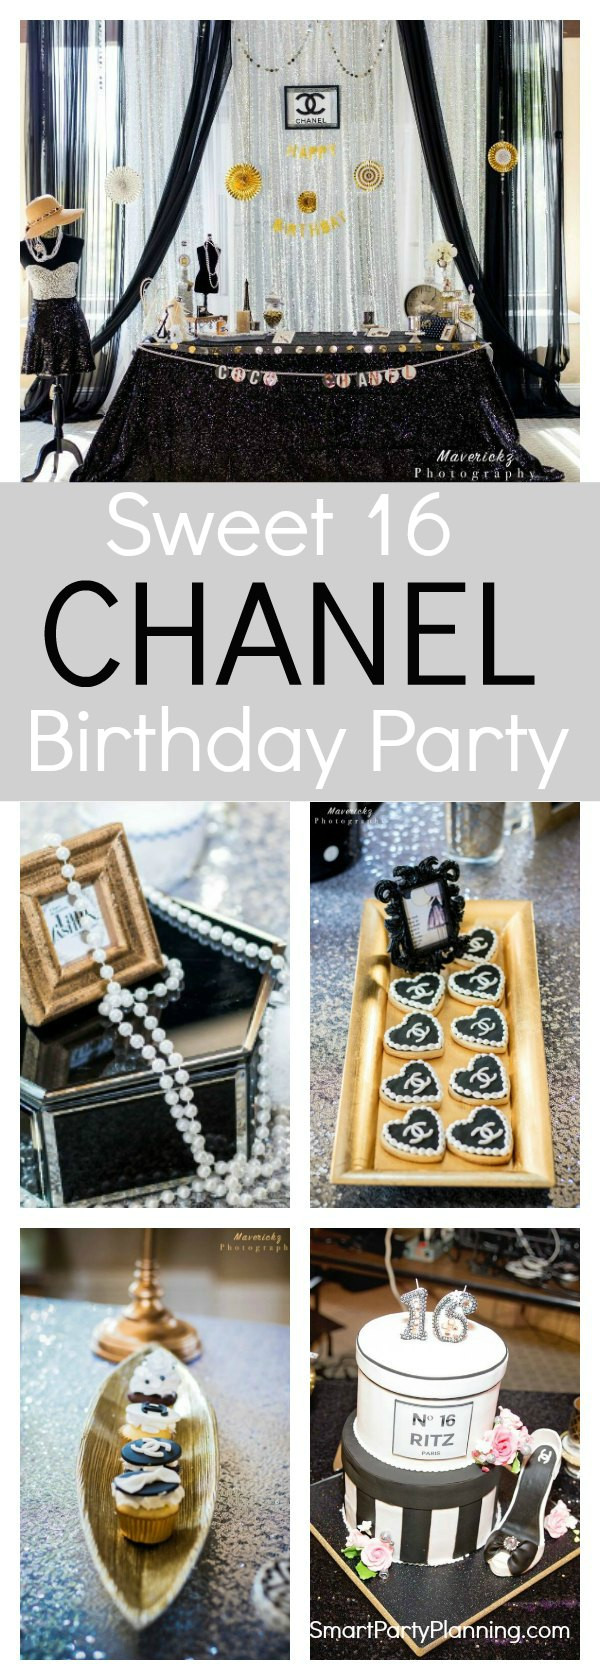 16 Birthday Ideas No Party
 Stunning Sweet 16 Chanel Birthday Party not to be Missed